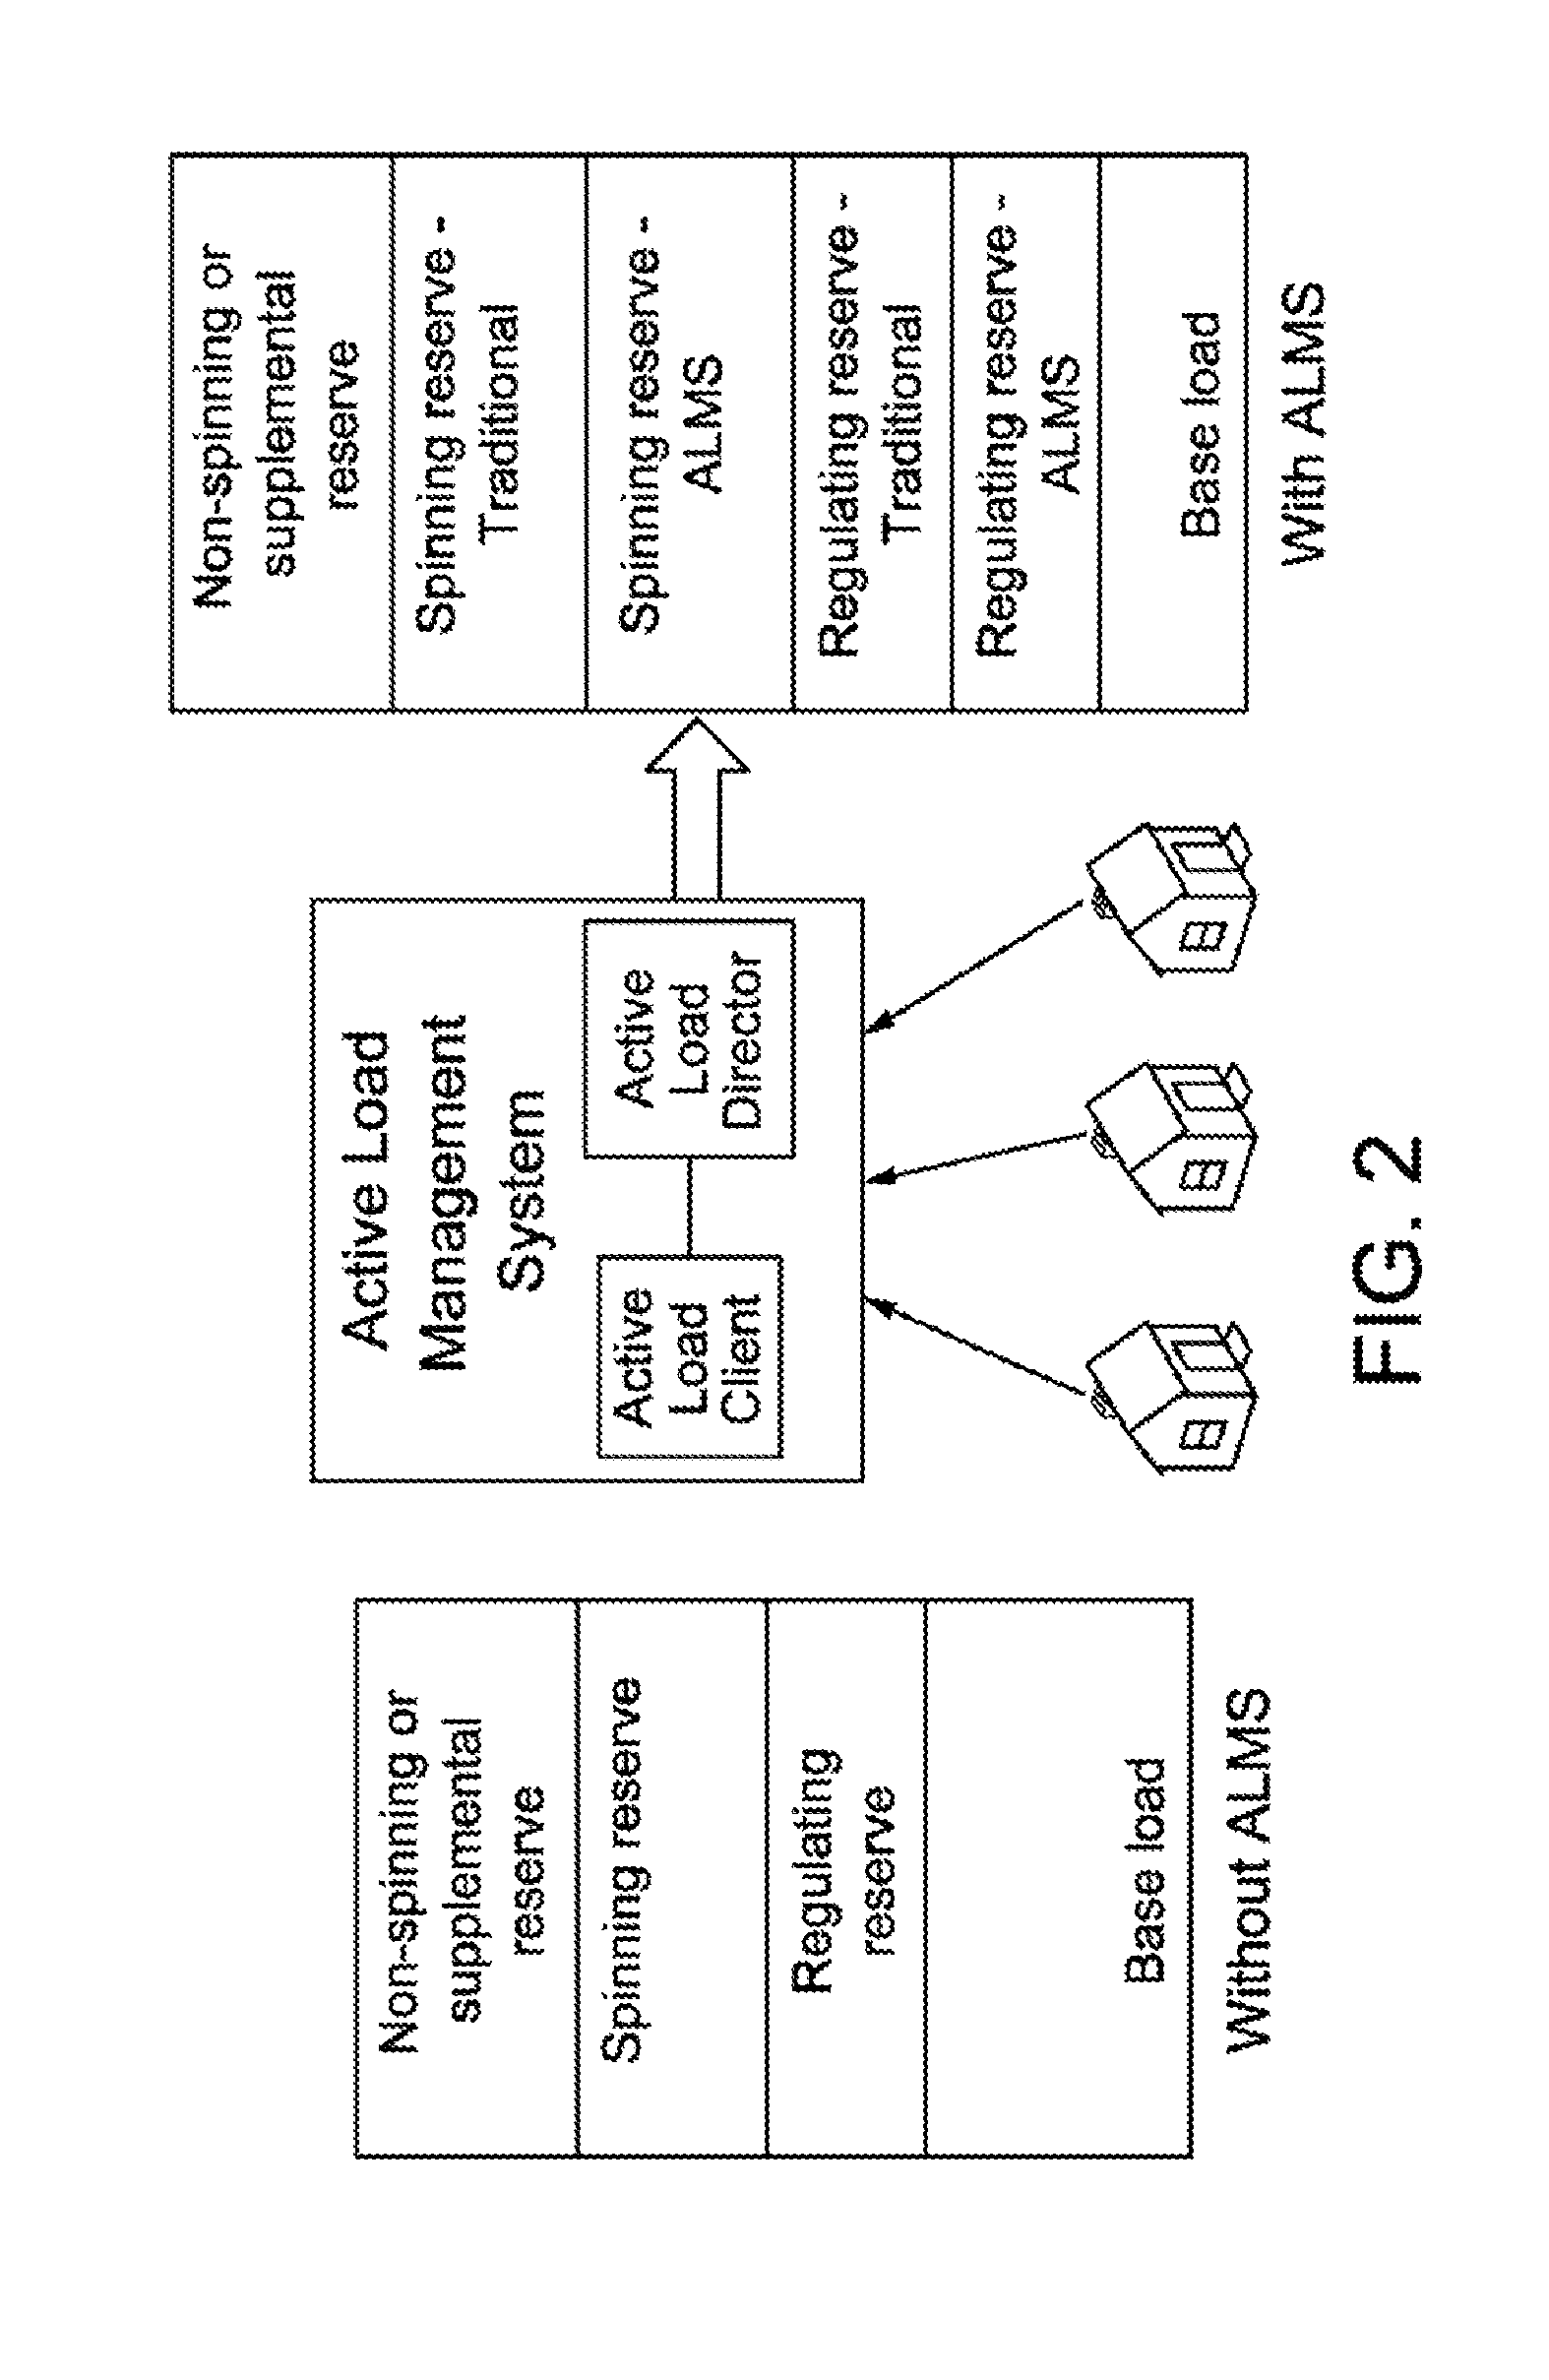 System and method for estimating and providing dispatchable operating reserve energy capacity through use of active load management